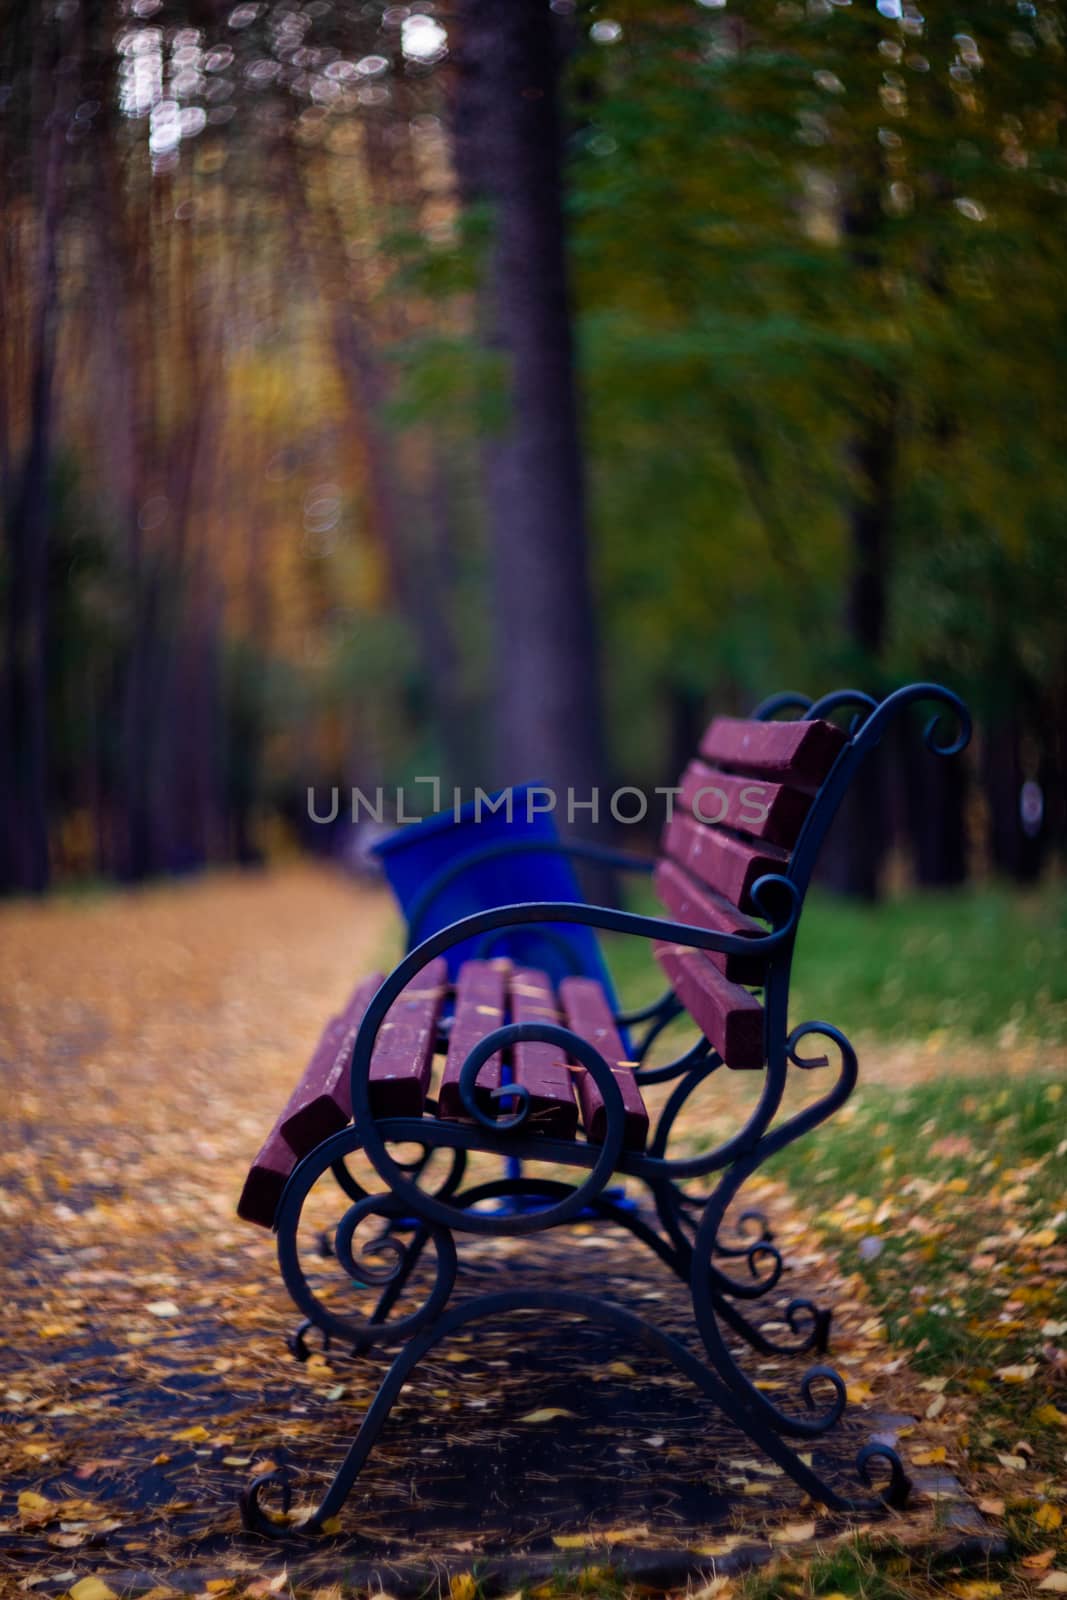 Bench in the park. It is autumn outside and there are some yellow leaves on the bench. The background is blurred. by alexsdriver